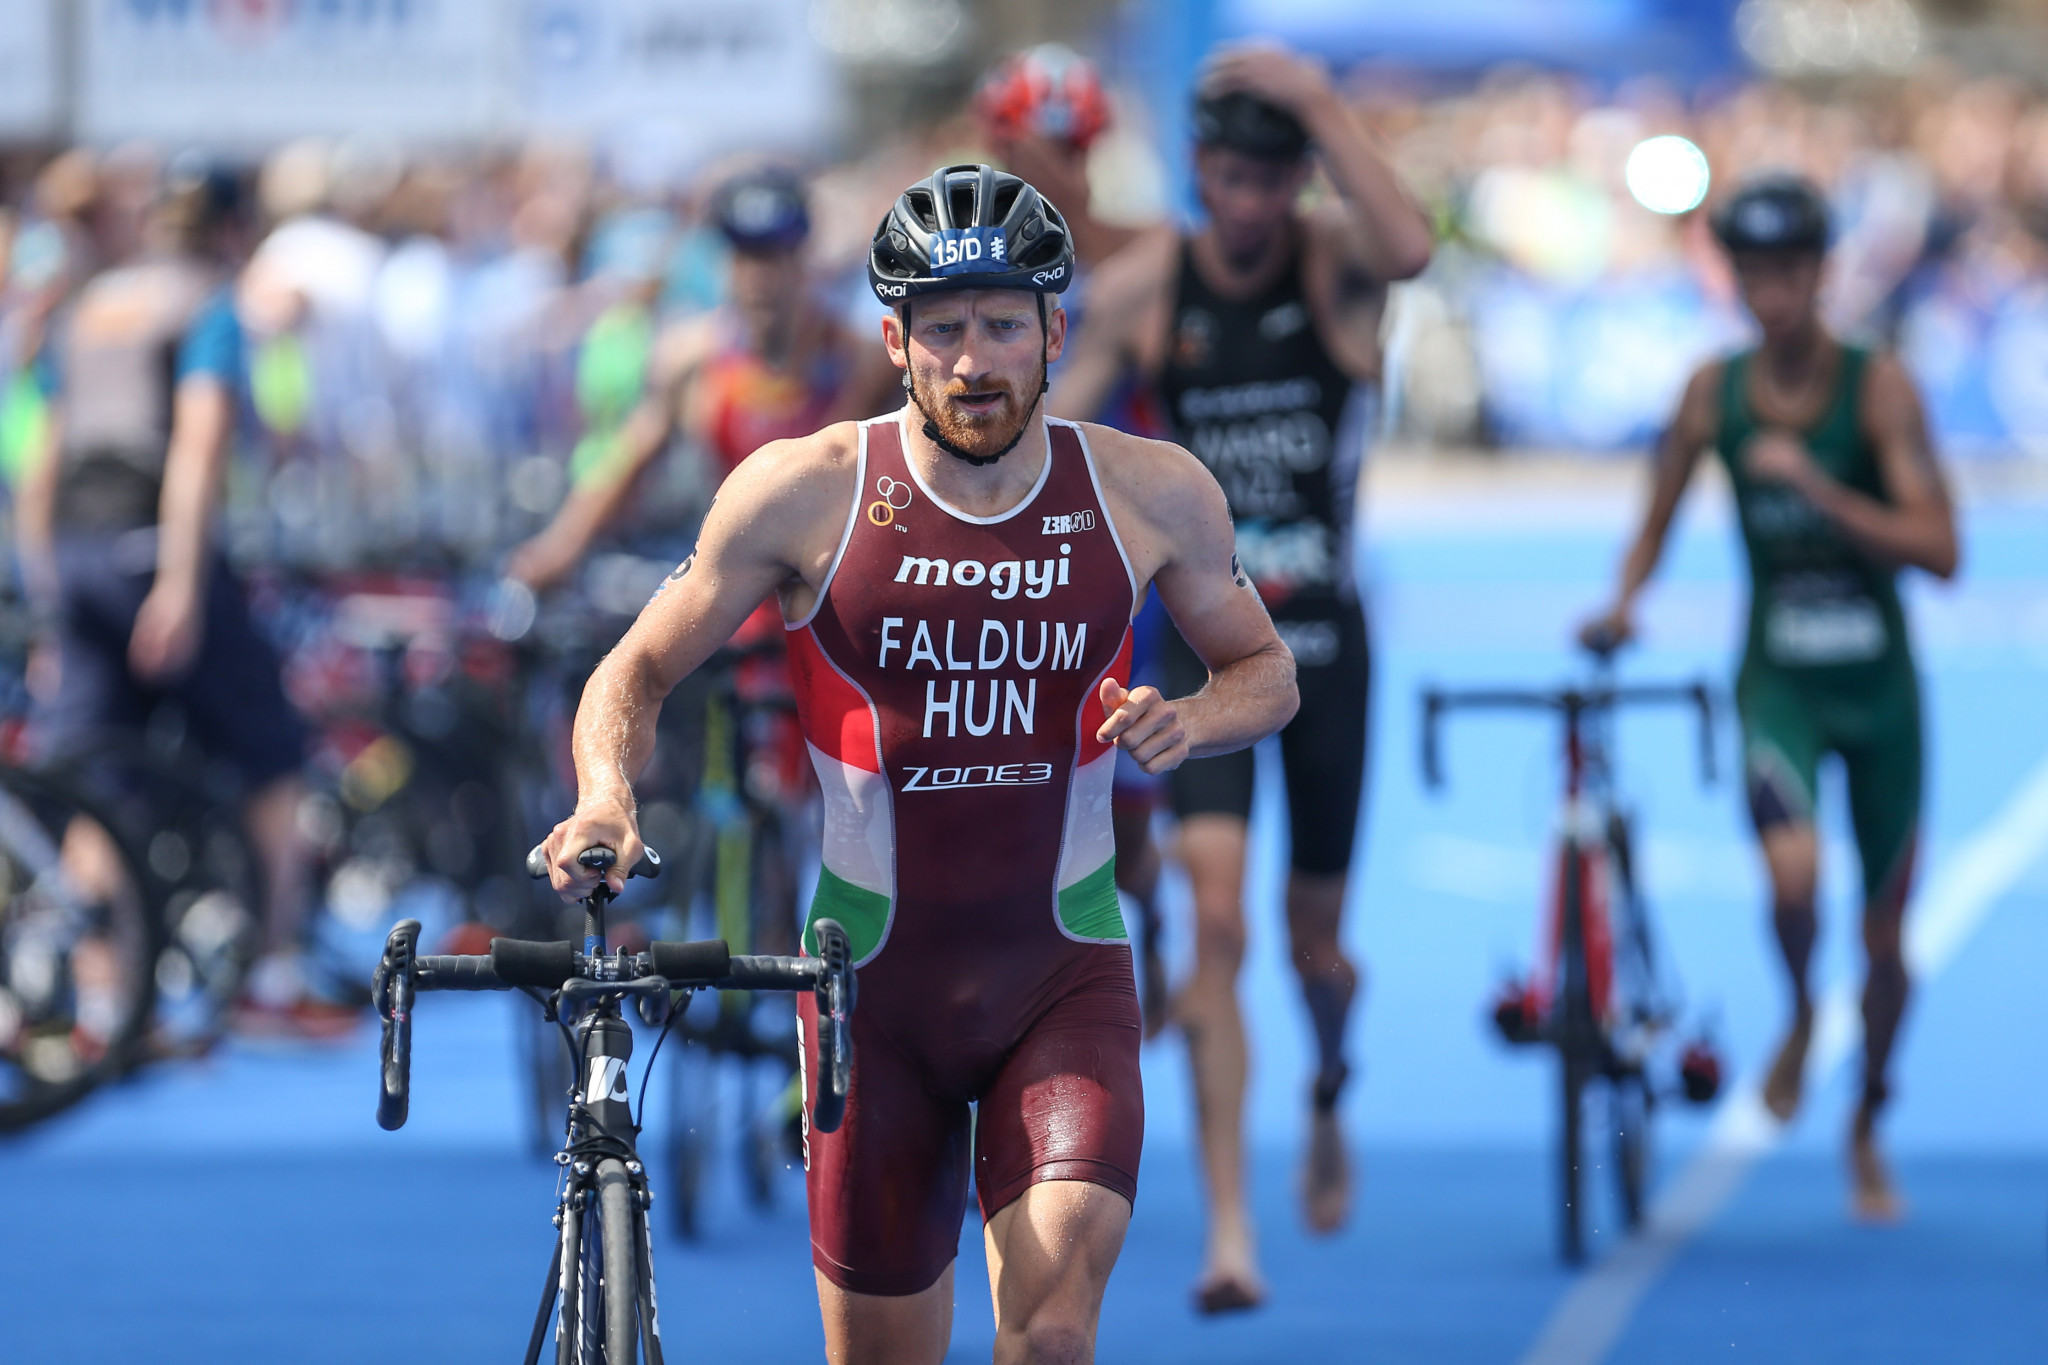 The International Triathlon Union has begun its search for host cities for major events ©Getty Images